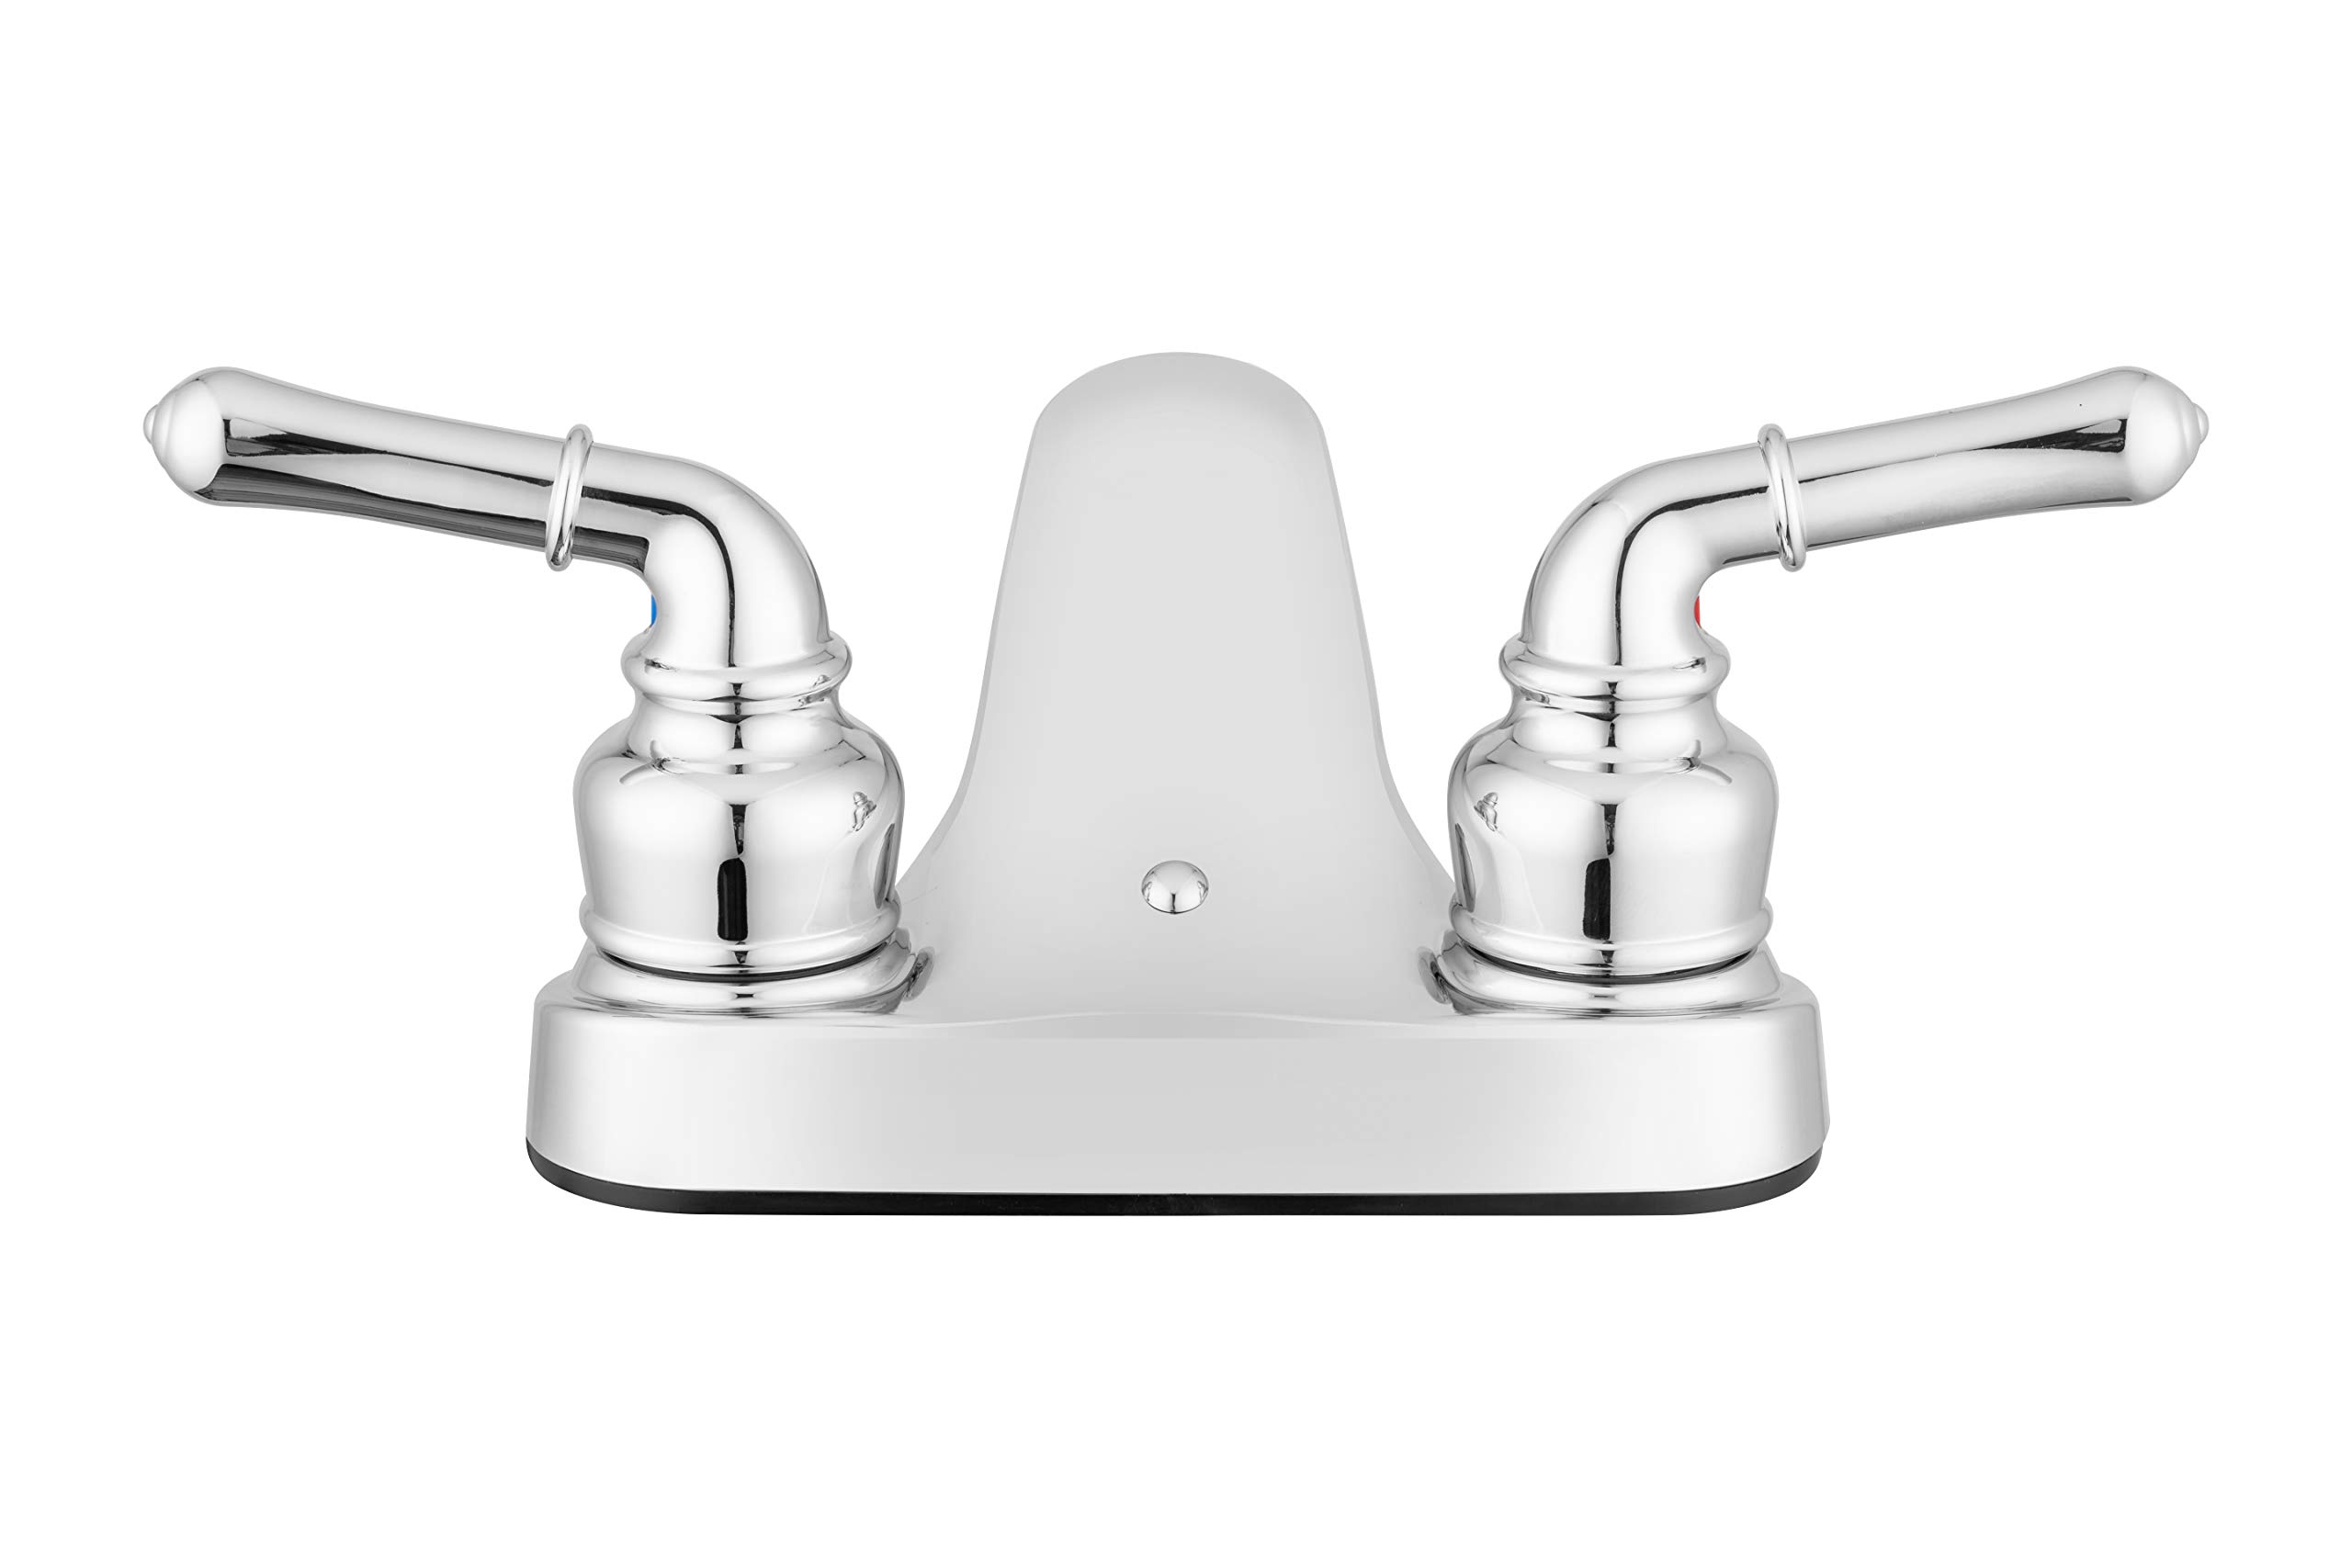 Pacific Bay Lynden Bathroom Sink Faucet - Metallic Plating Over Lightweight ABS Plastic (Chrome)